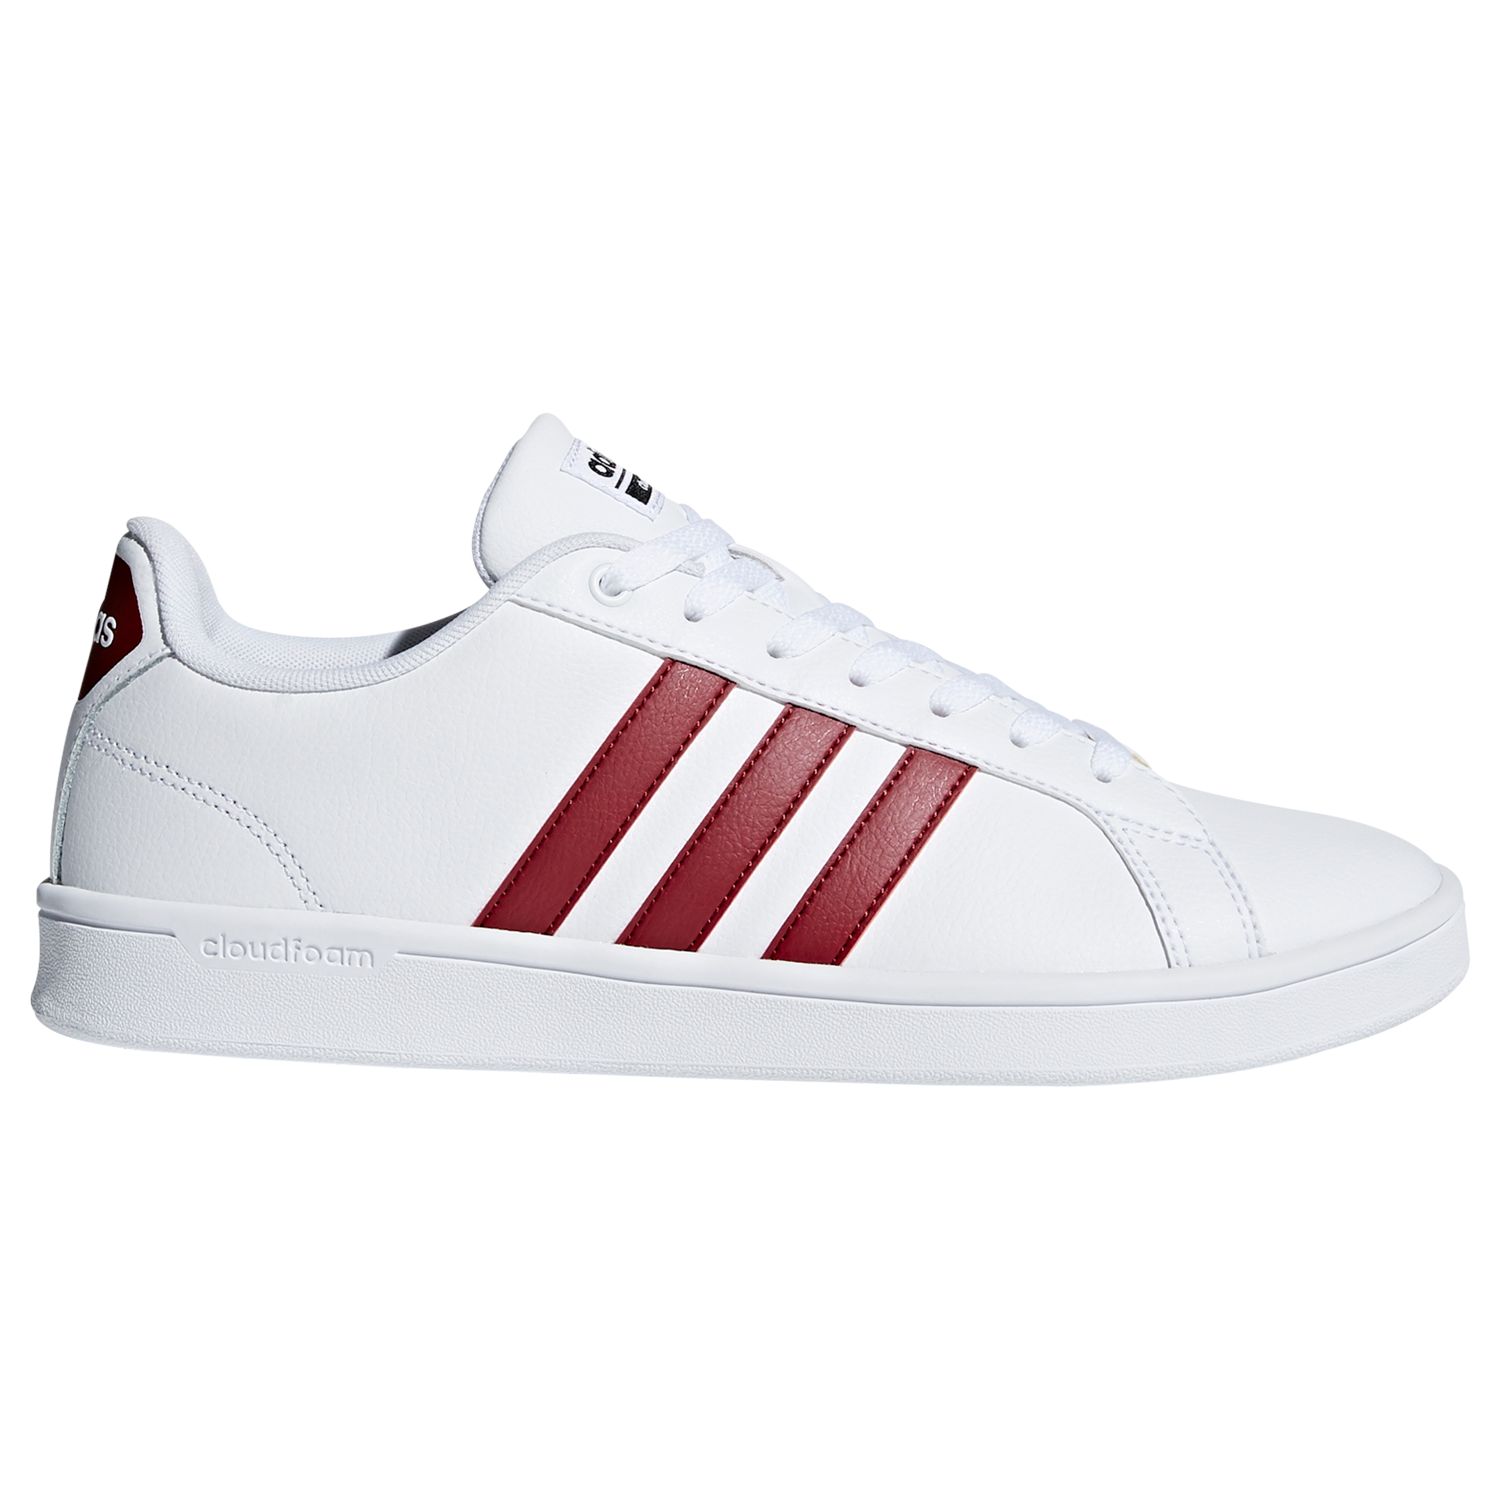 mens white and red trainers